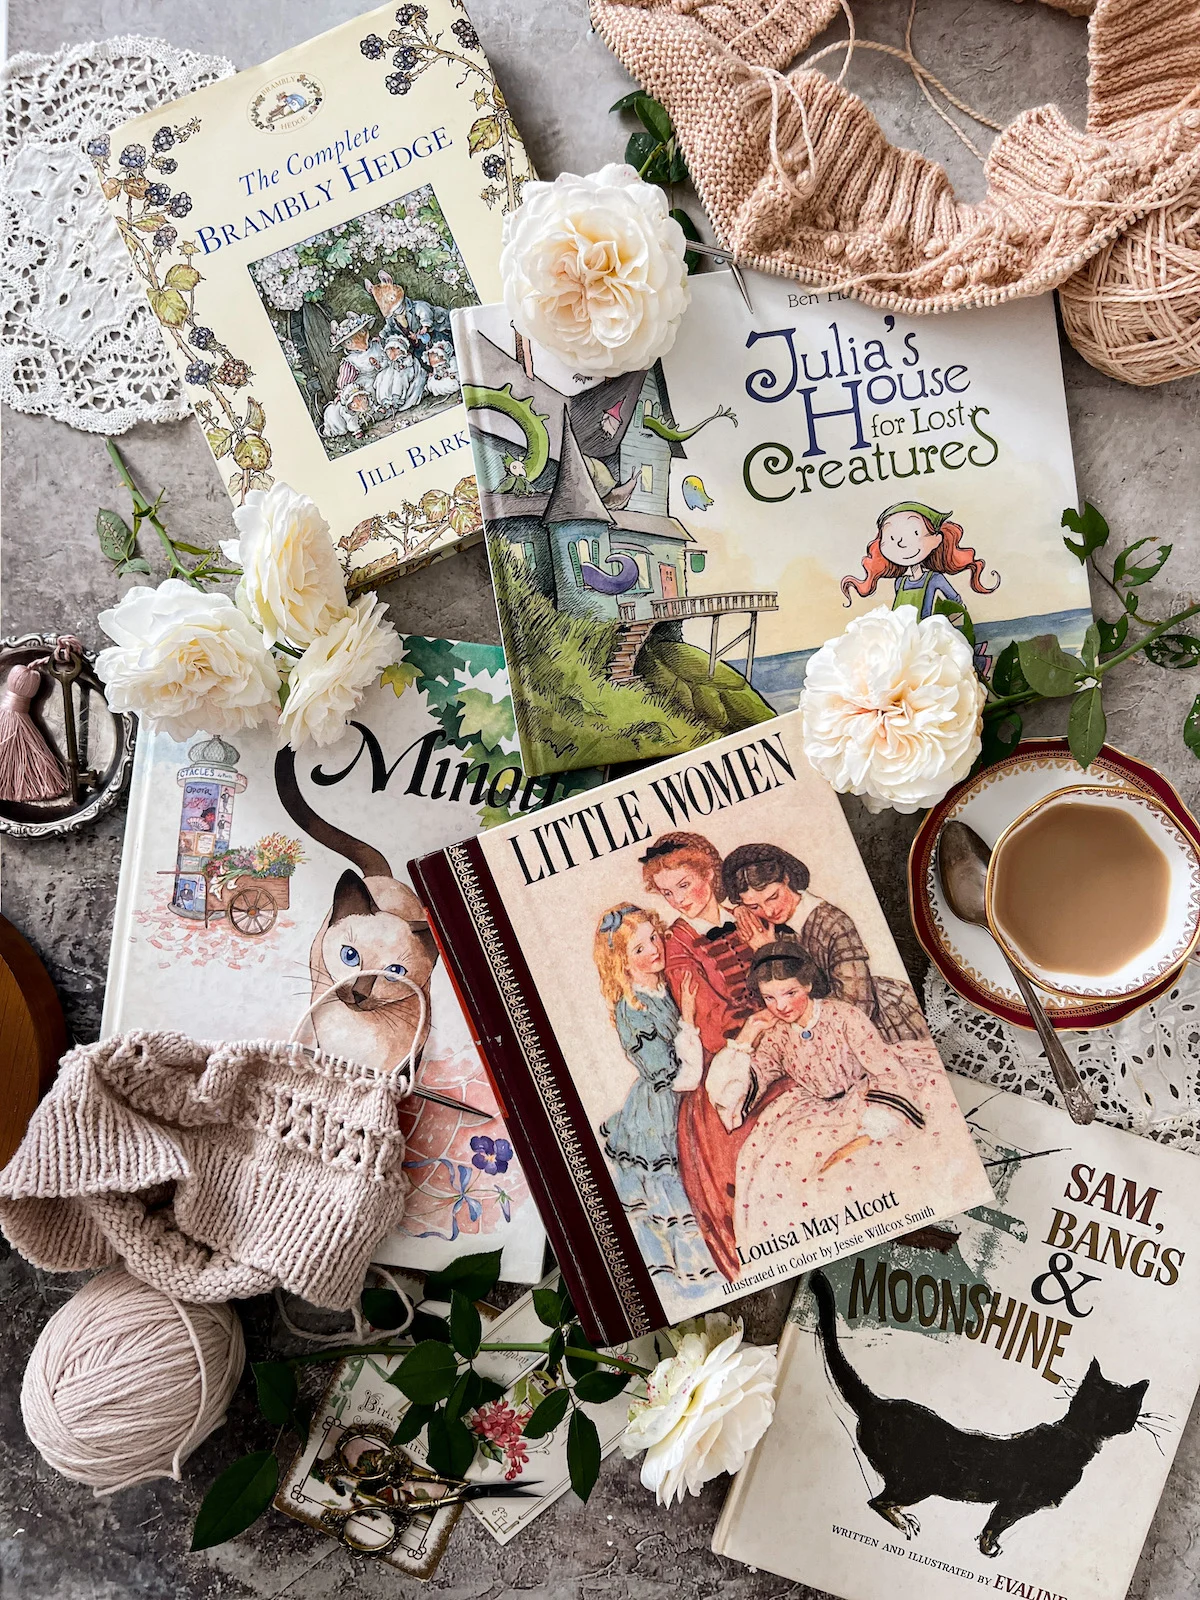 Five children's books are laid out flat on a gray surface, surrounded by several white roses, some knitting projects, a teacup and saucer, and a couple antique doilies. The books are The Complete Brambly Hedge, Julia's House for Lost Creatures, Minou, Little Women, and Sam, Bangs, and Moonshine.